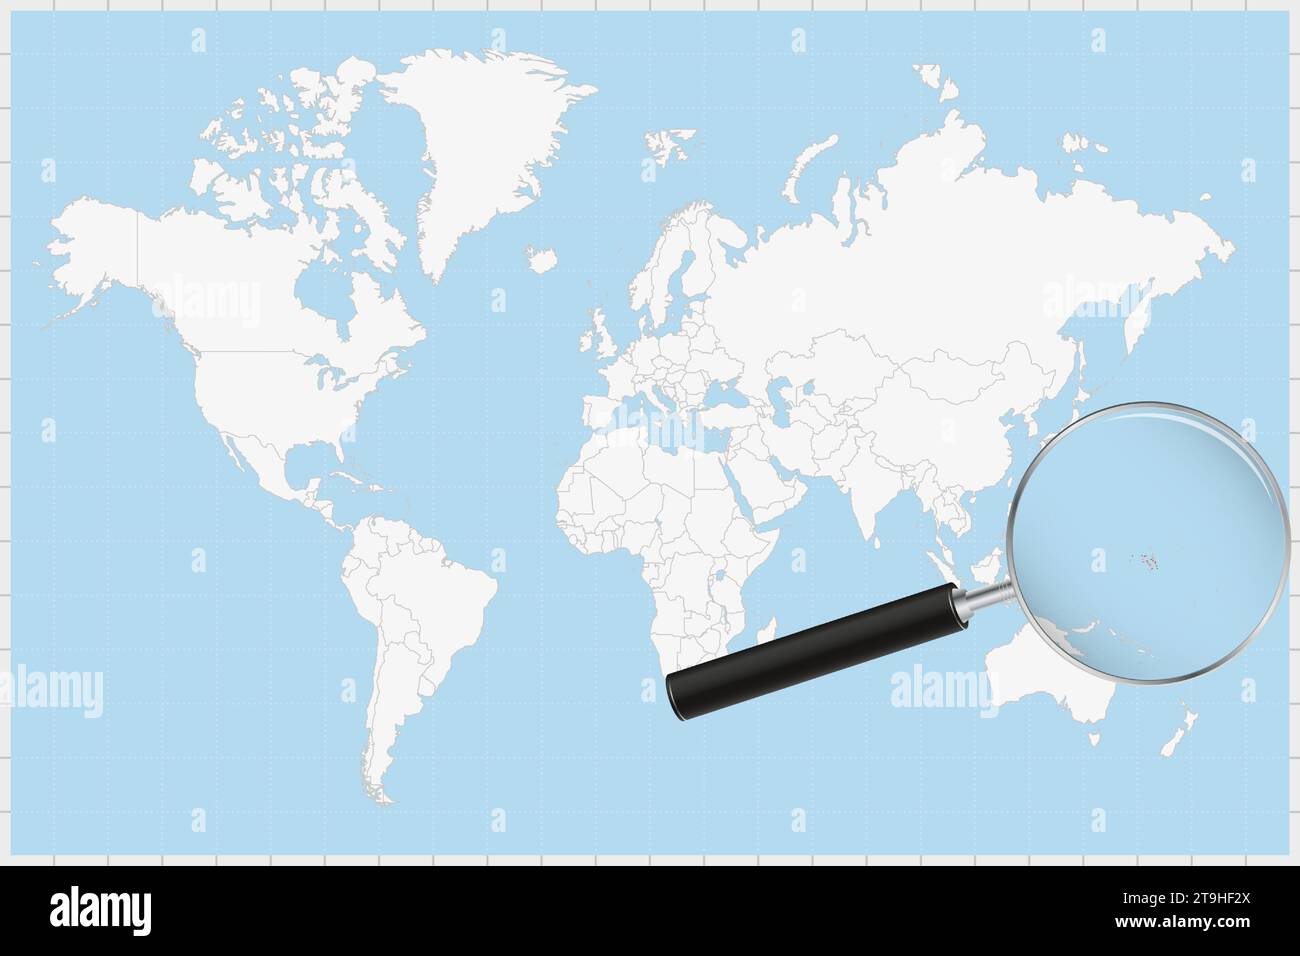 Magnifying glass showing a map of Marshall Islands on a world map. Marshall Islands flag and map enlarge in lens. Vector Illustration. Stock Vector